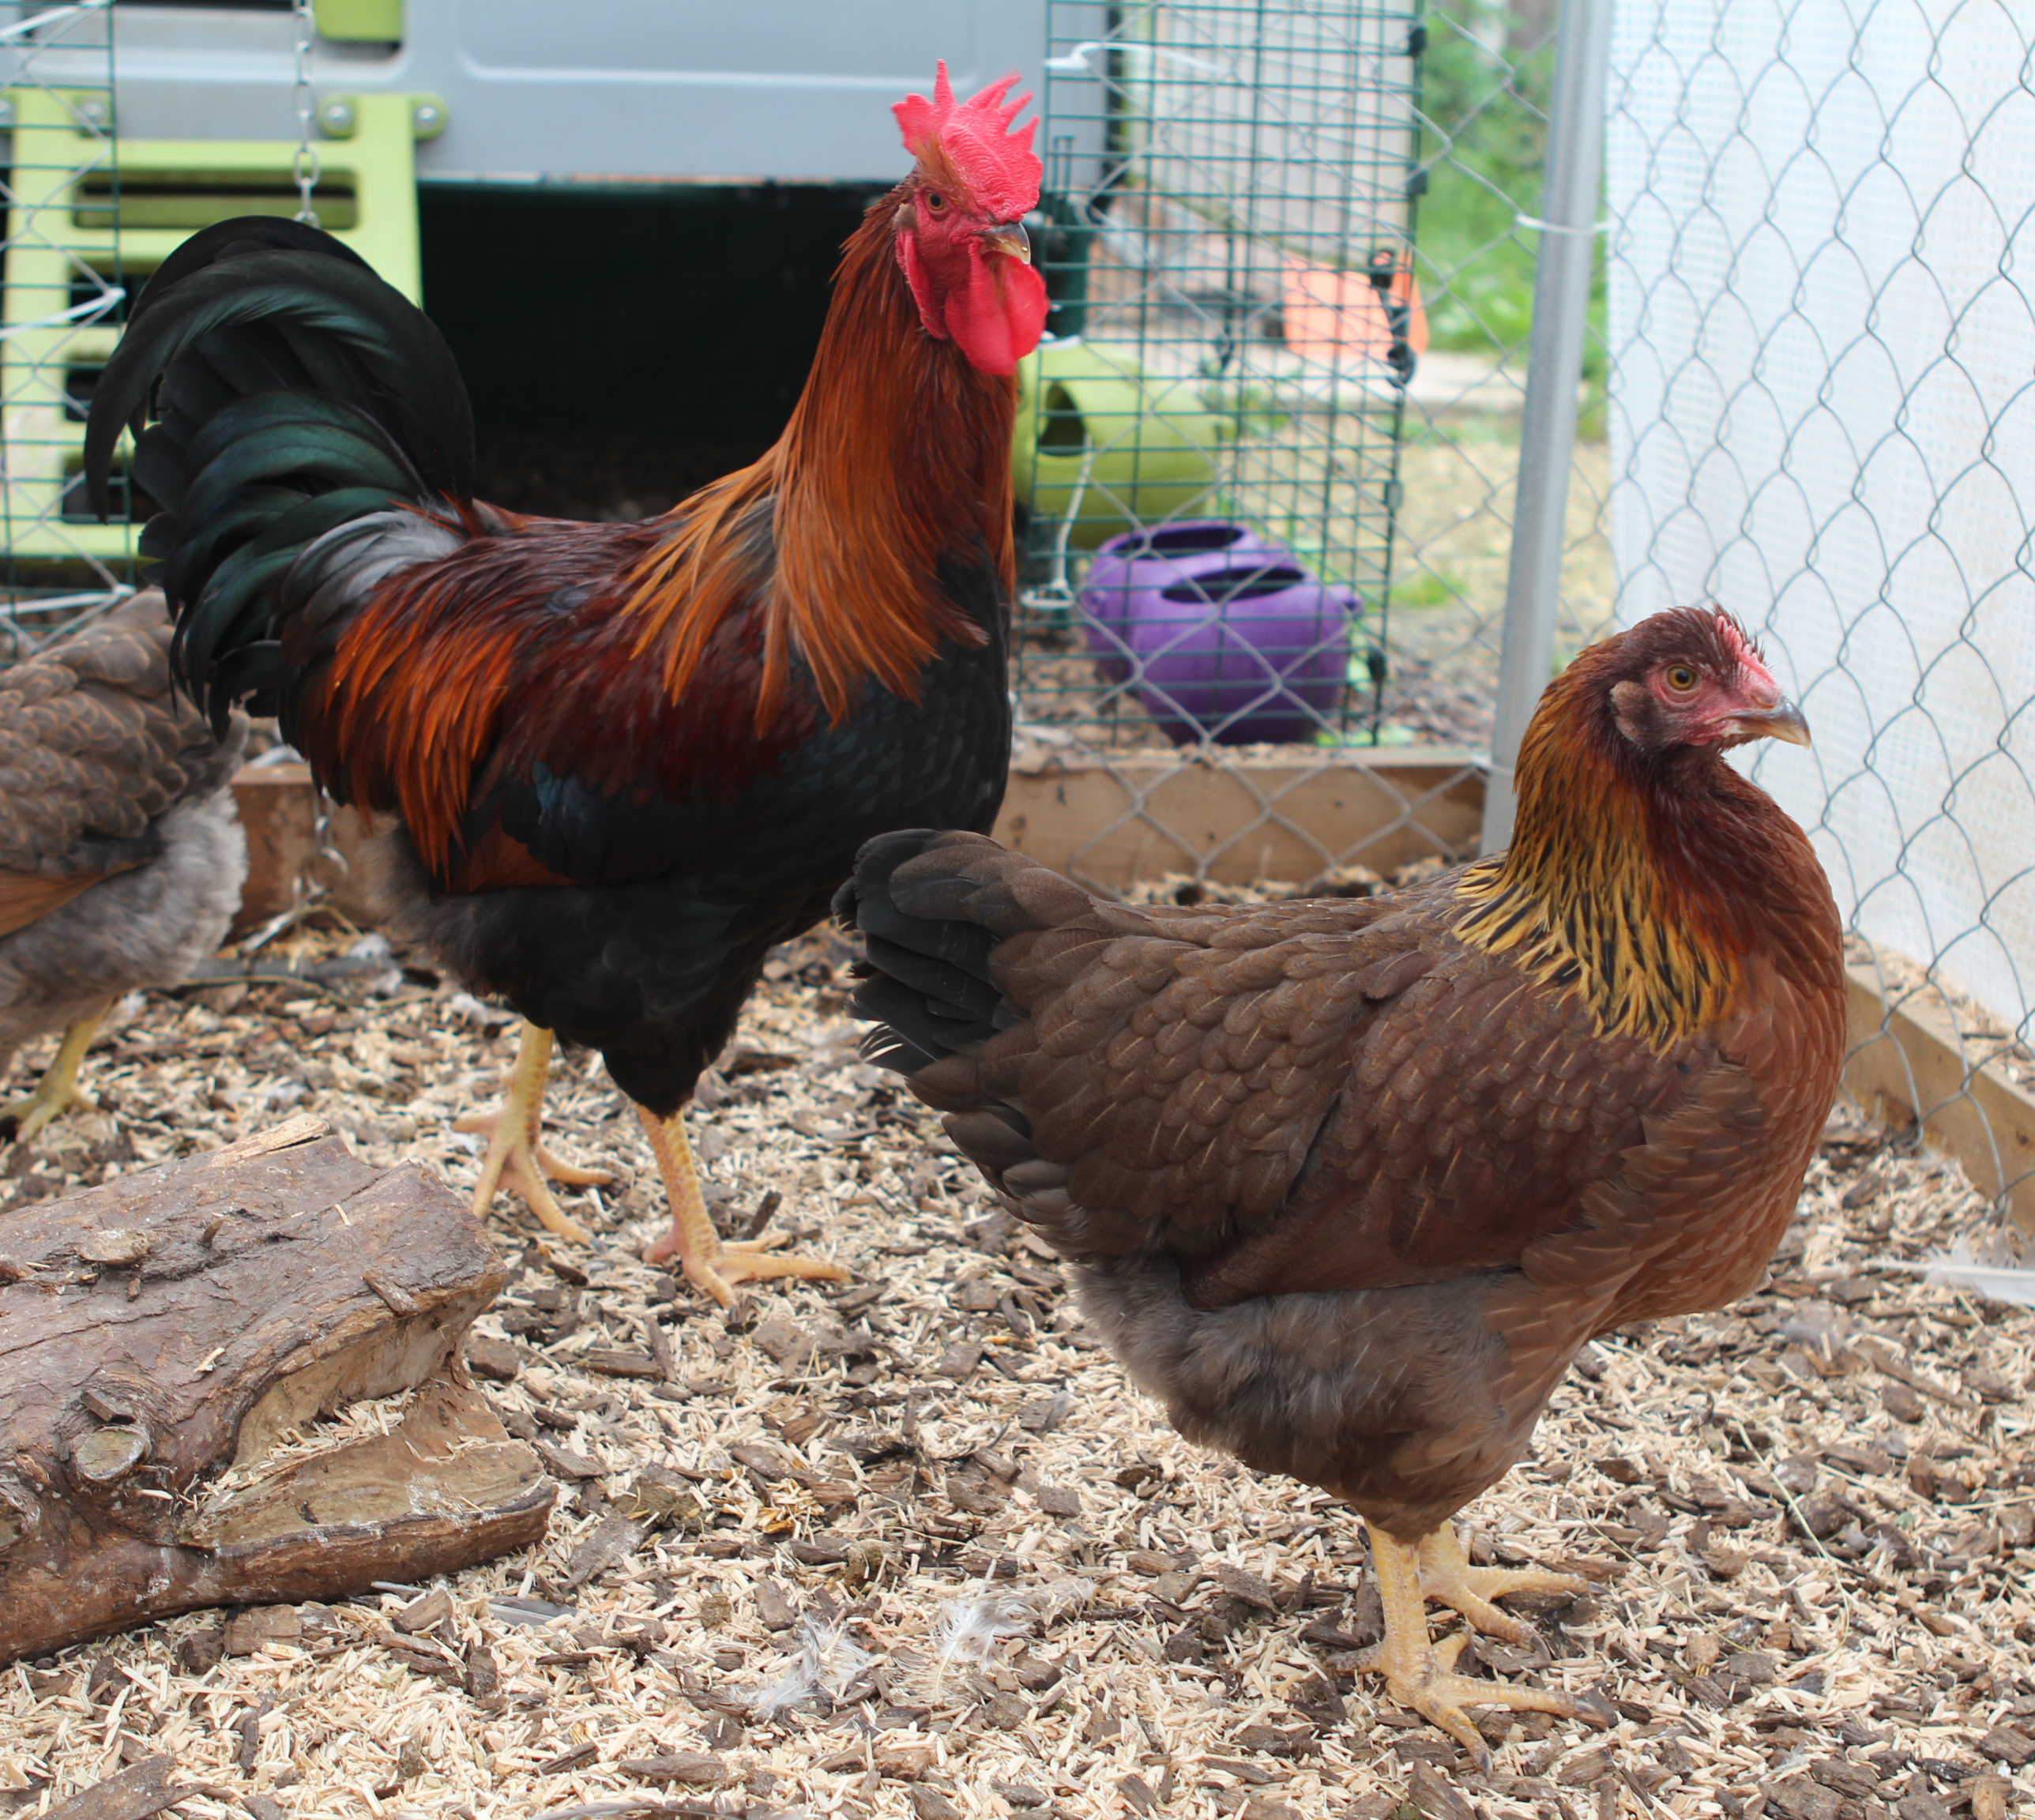 Samantha Dawson's lovely Welsummer hens are being looked after by her cockerel